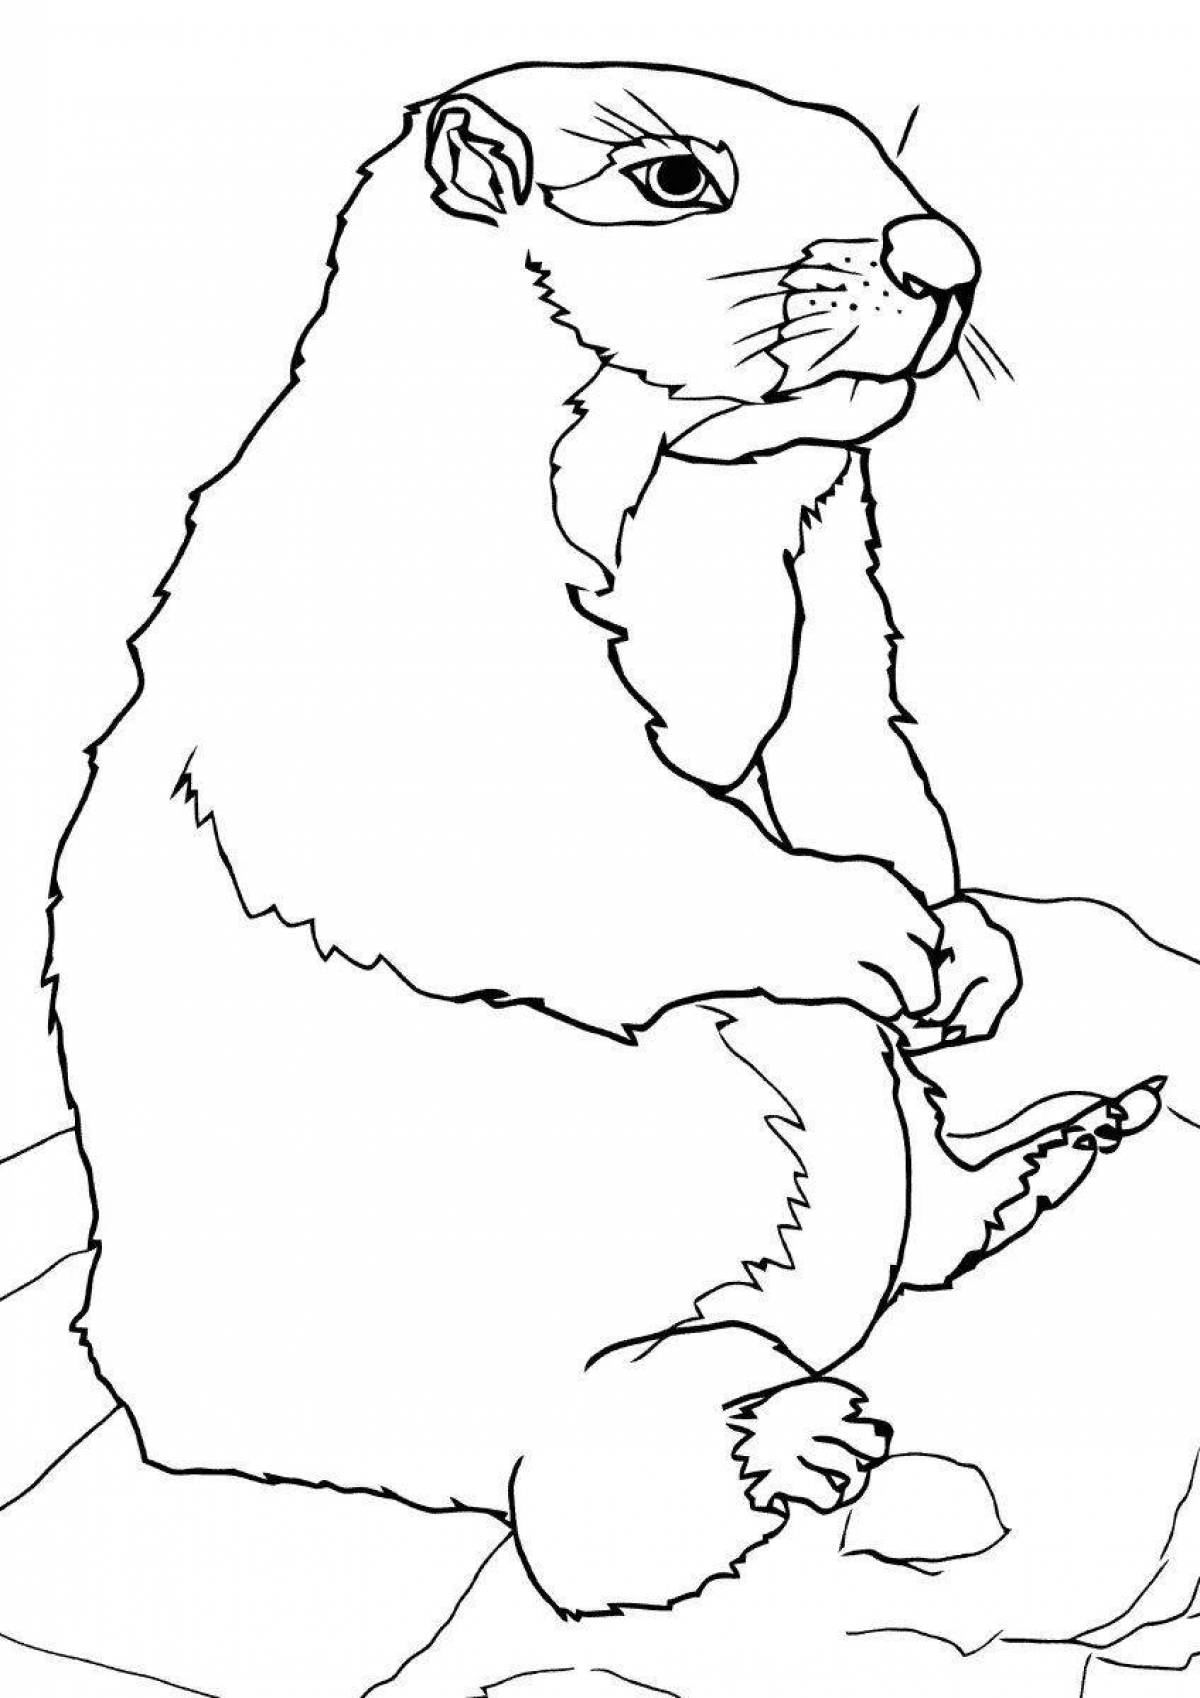 Fancy gopher coloring for kids